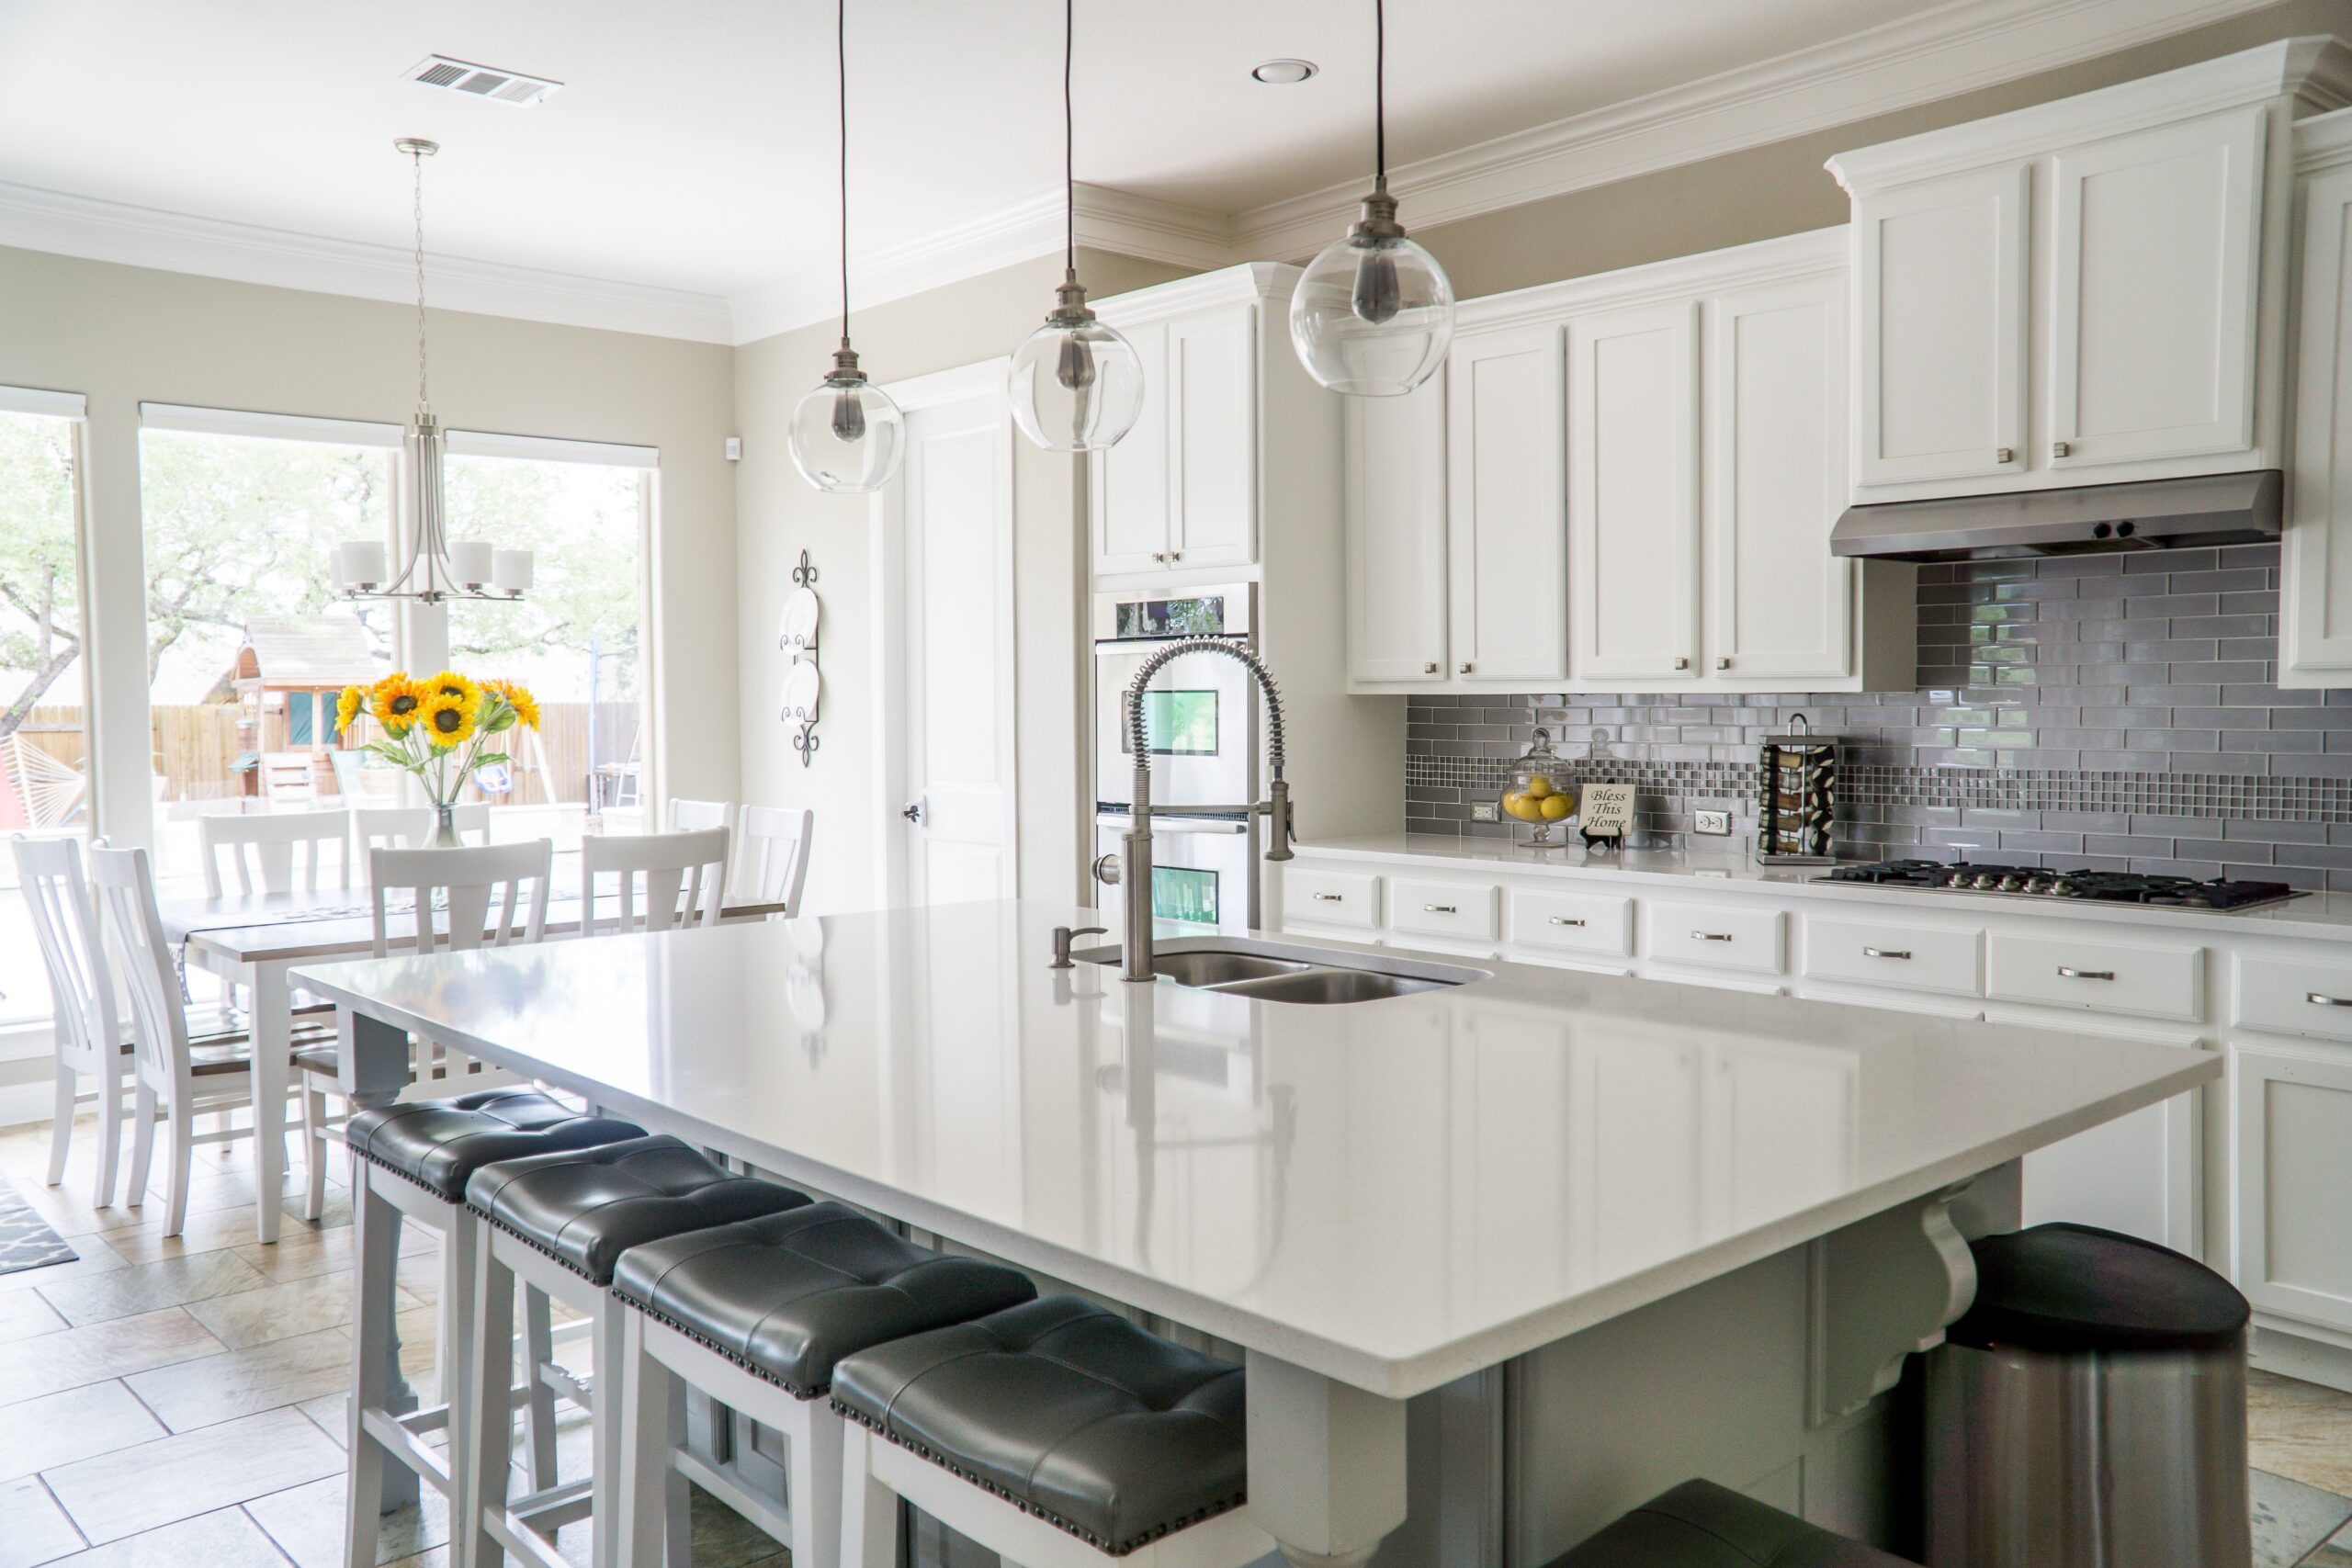 Kitchen Lighting: How to Choose the Right Fixtures for Your Home